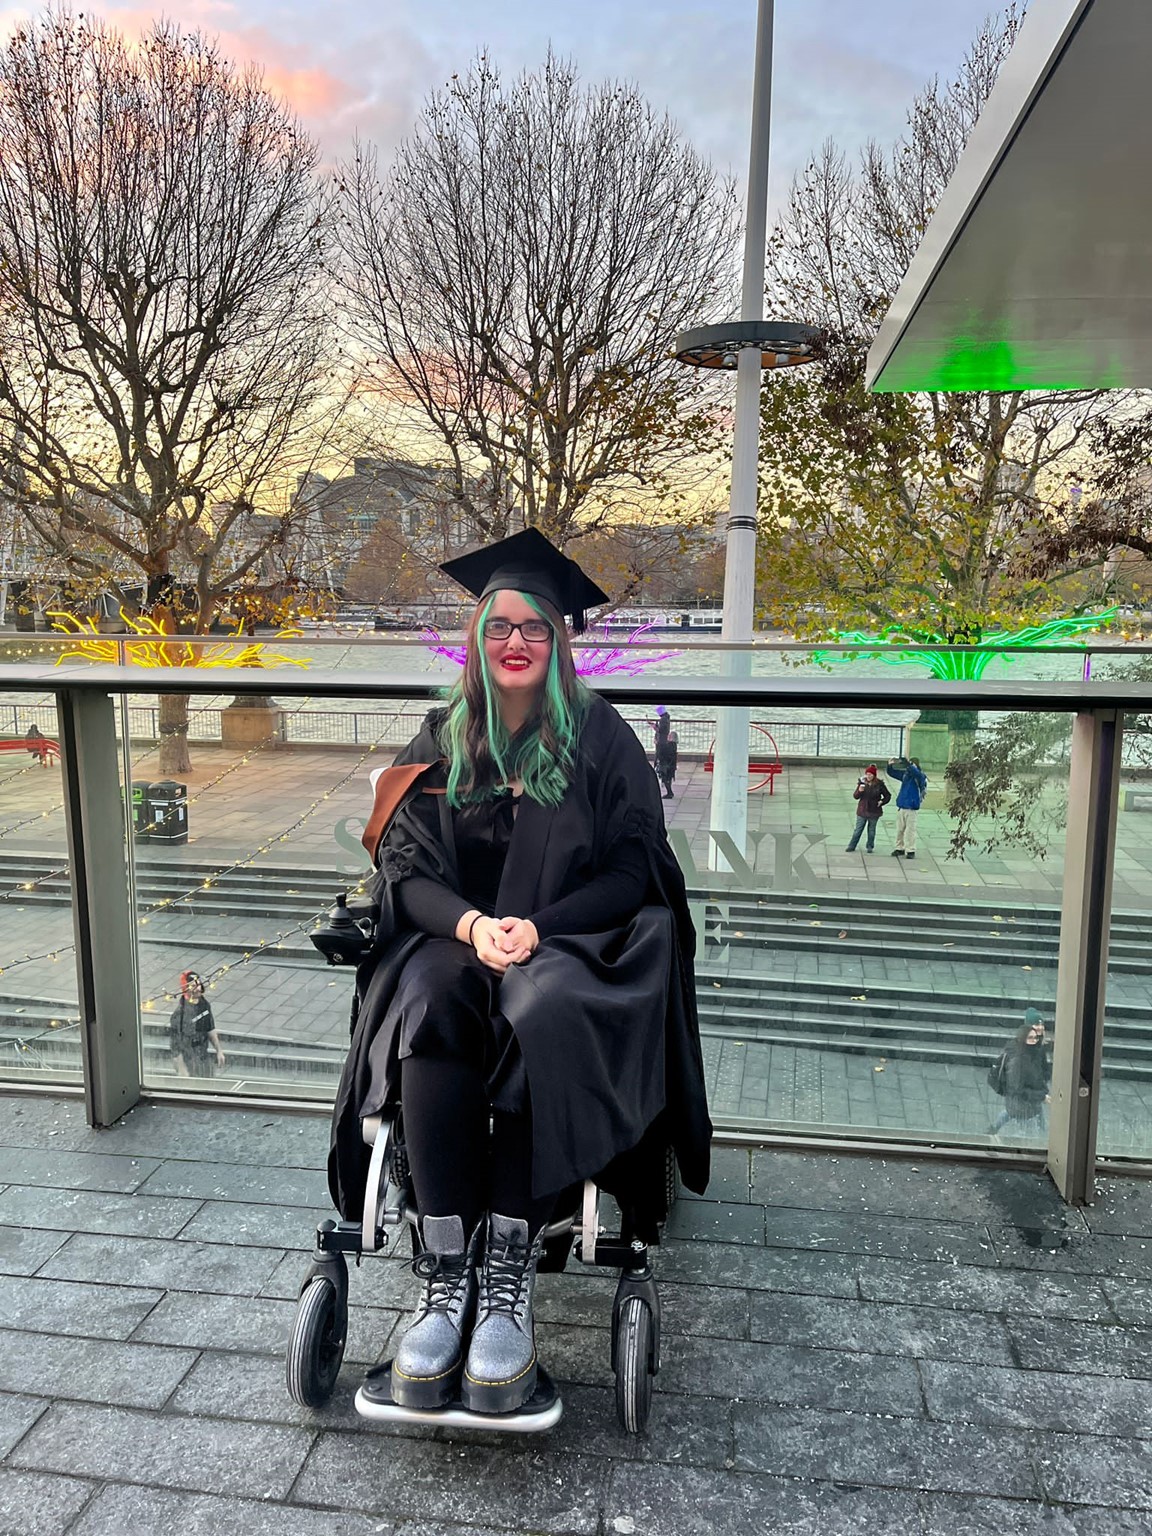 Rowan, a woman with green hair, sits in her wheelchair wearing a black graduation cap and gown. She is smiling at the camera. Behind her is a glass barrier and three trees lit up from their bases each with a different colour light of yellow, pink, and green. Beyond the trees is a river with stone university buildings on the opposite bank. The sun is setting.